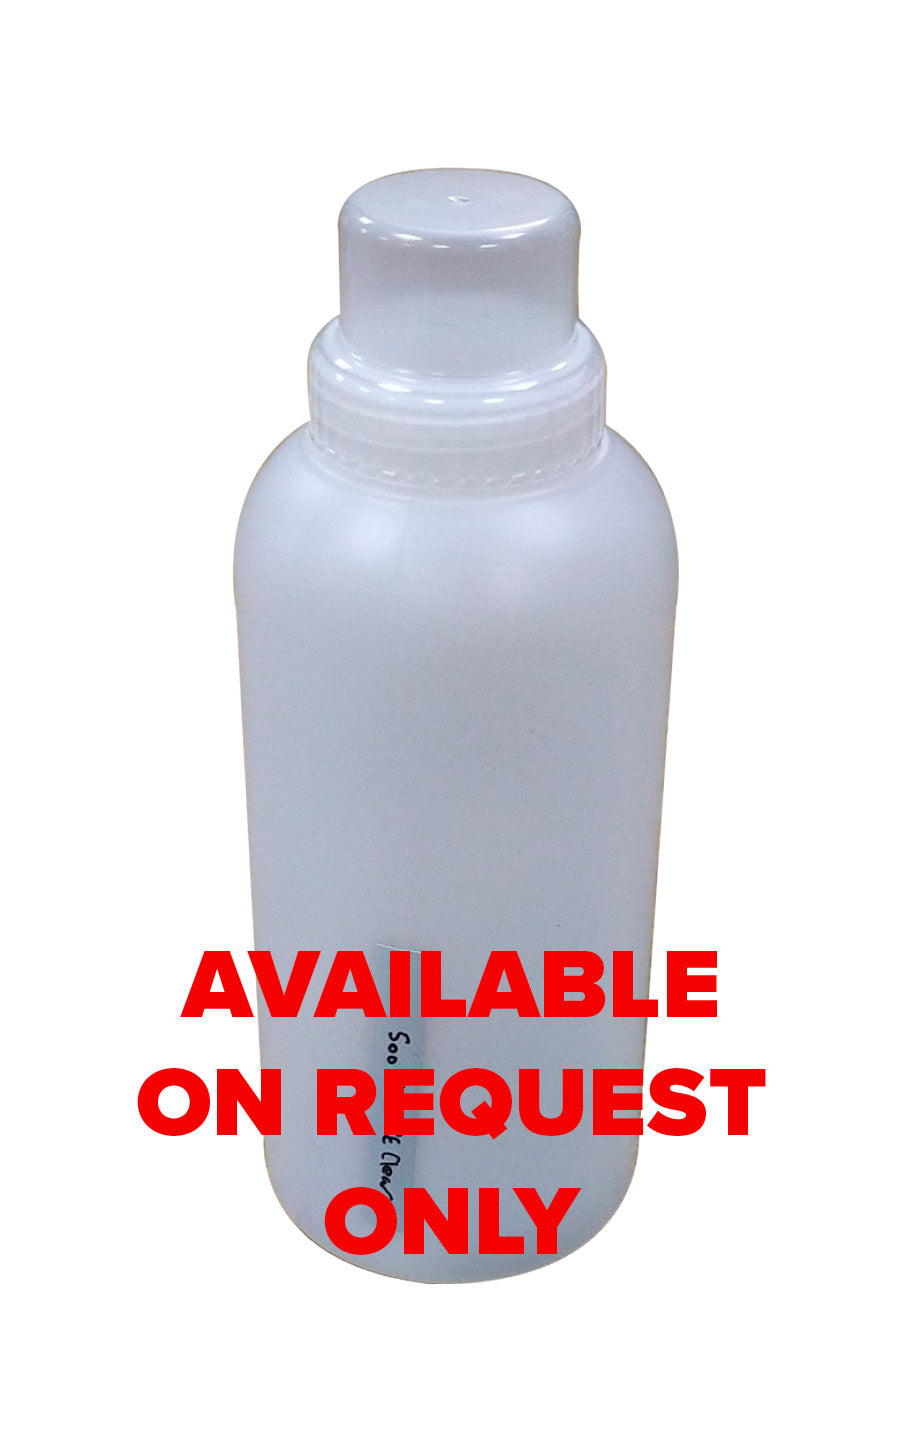 500ml Round Bottle (FP1/291) Available on request only